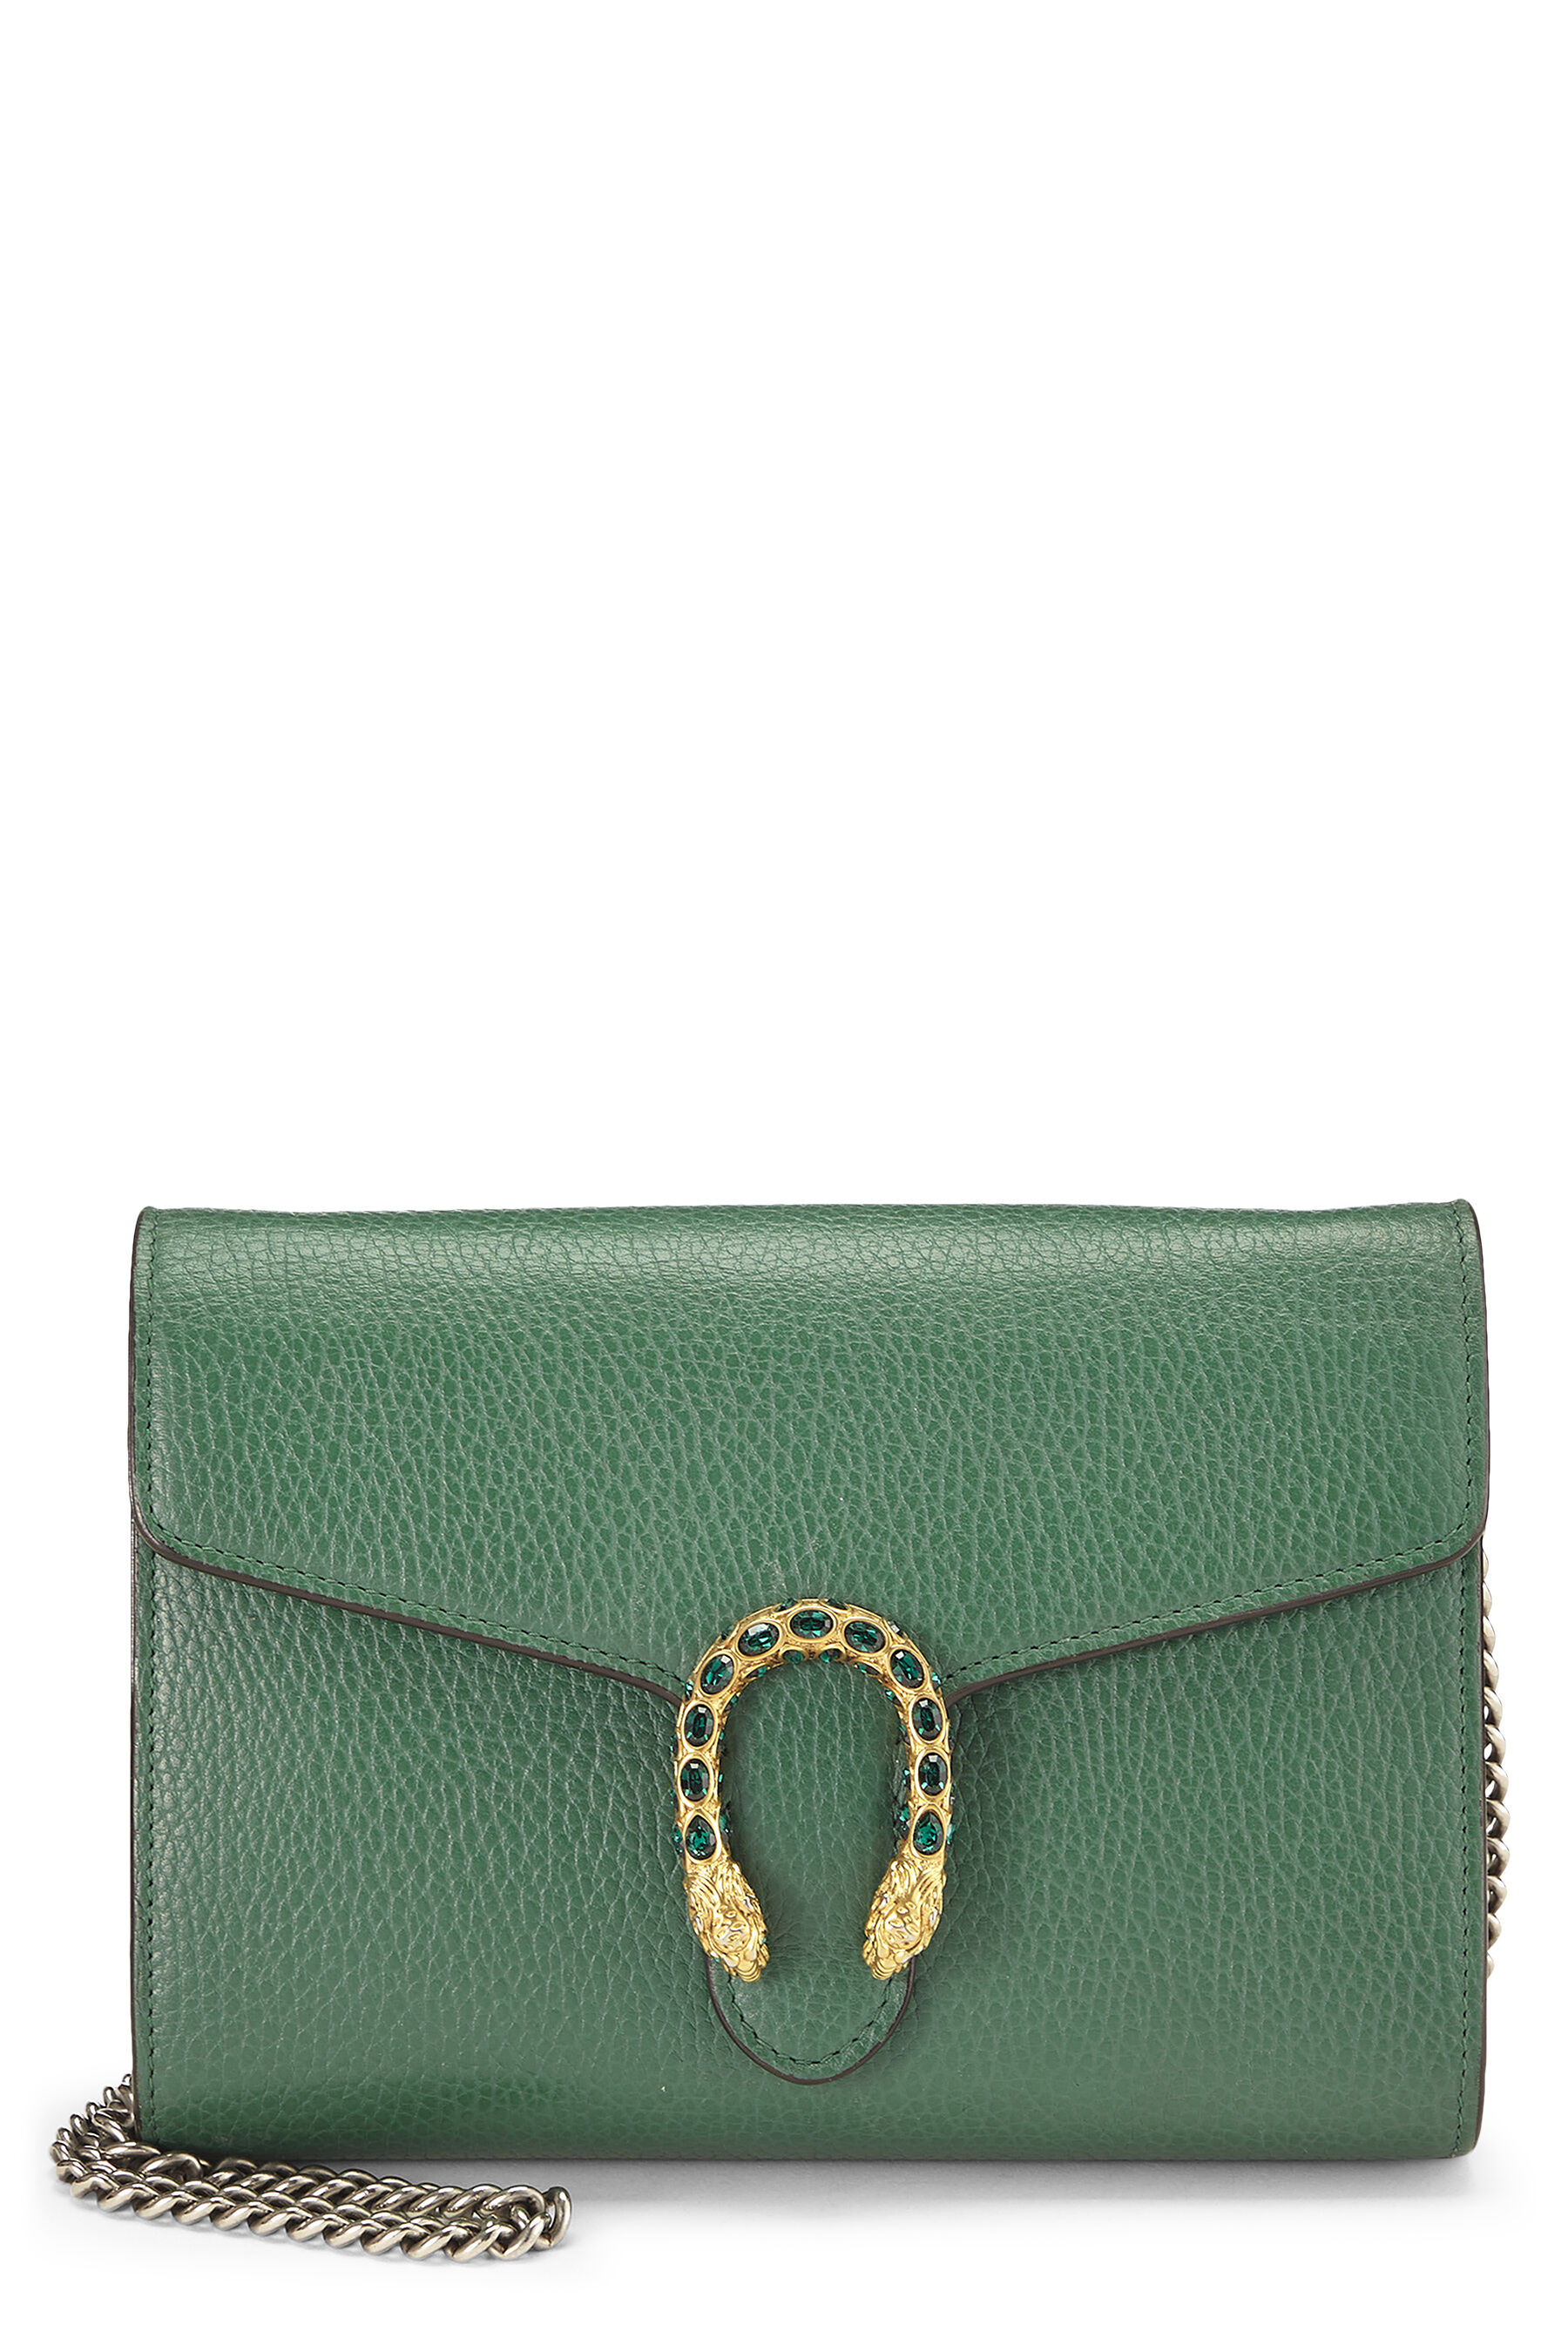 Gucci Multicolor Leather Dionysus Wallet on Chain (WOC